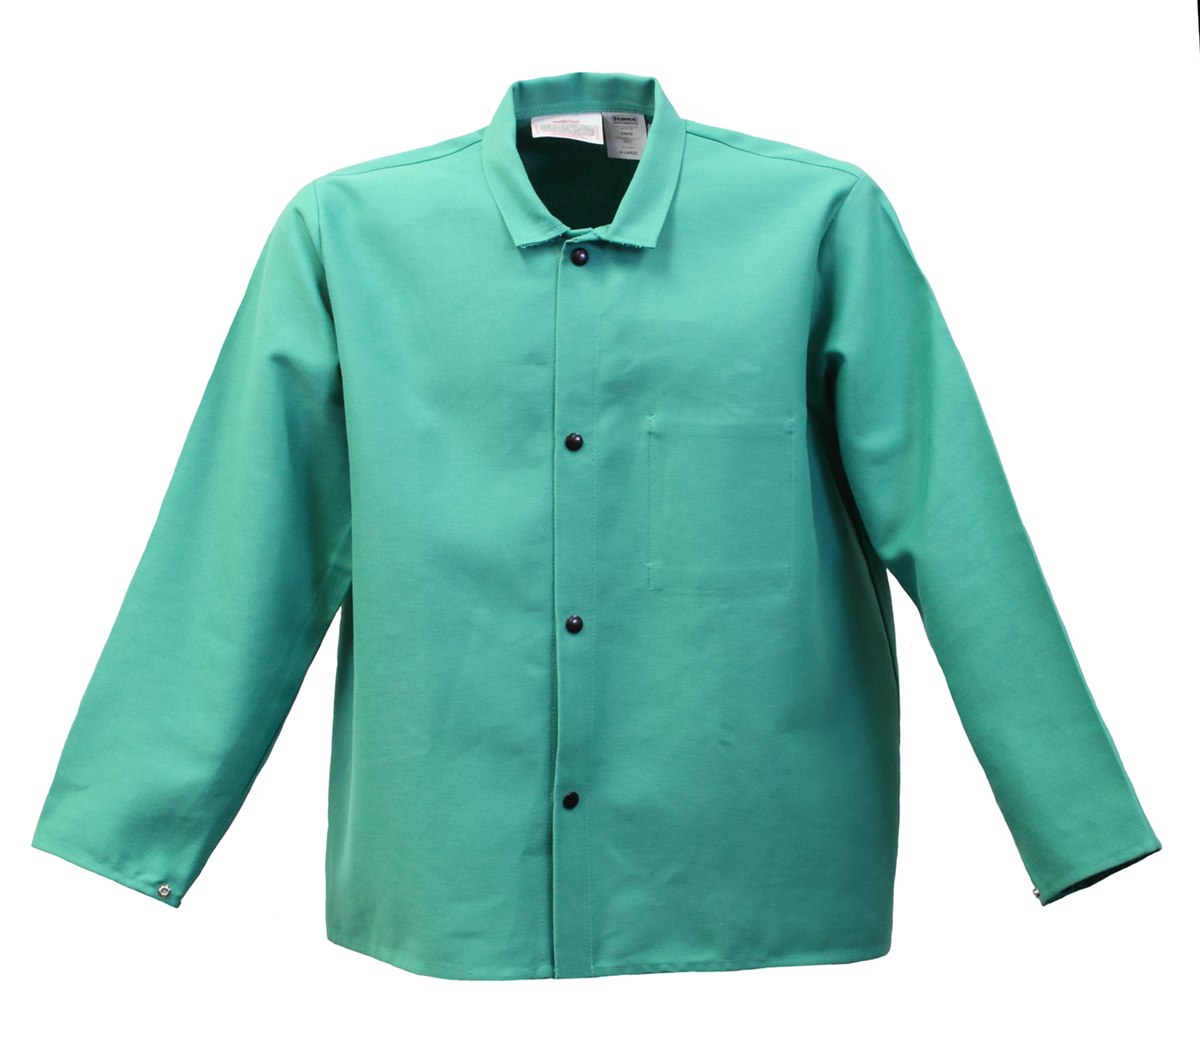 Stanco Safety Products™ Size 4X Green Cotton Flame Resistant Jacket With Snap Closure